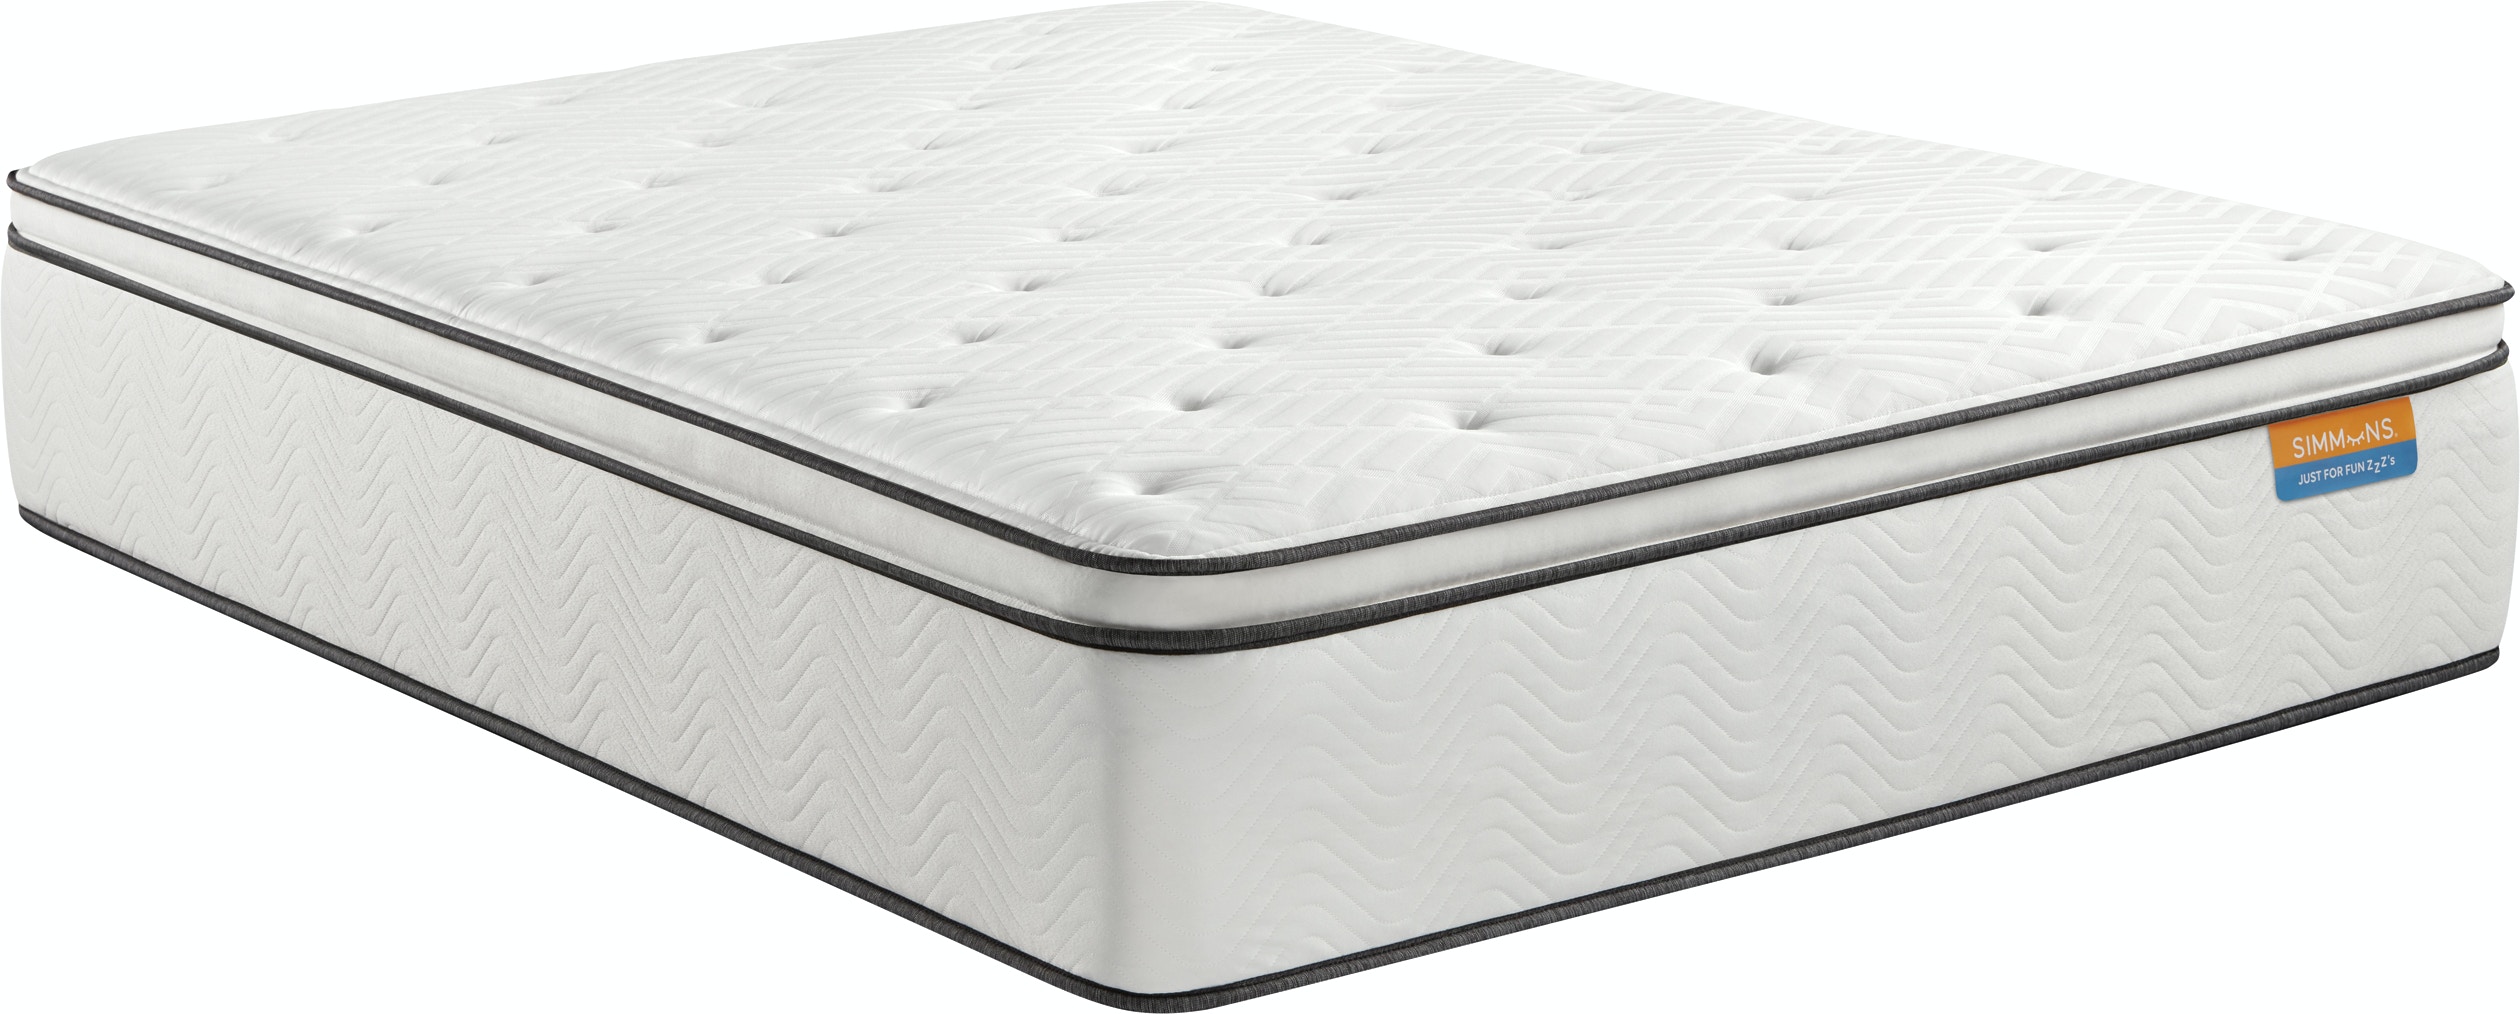 Simmons VACAY FULL PLUSH PILLOW TOP MATTRESS ONLY